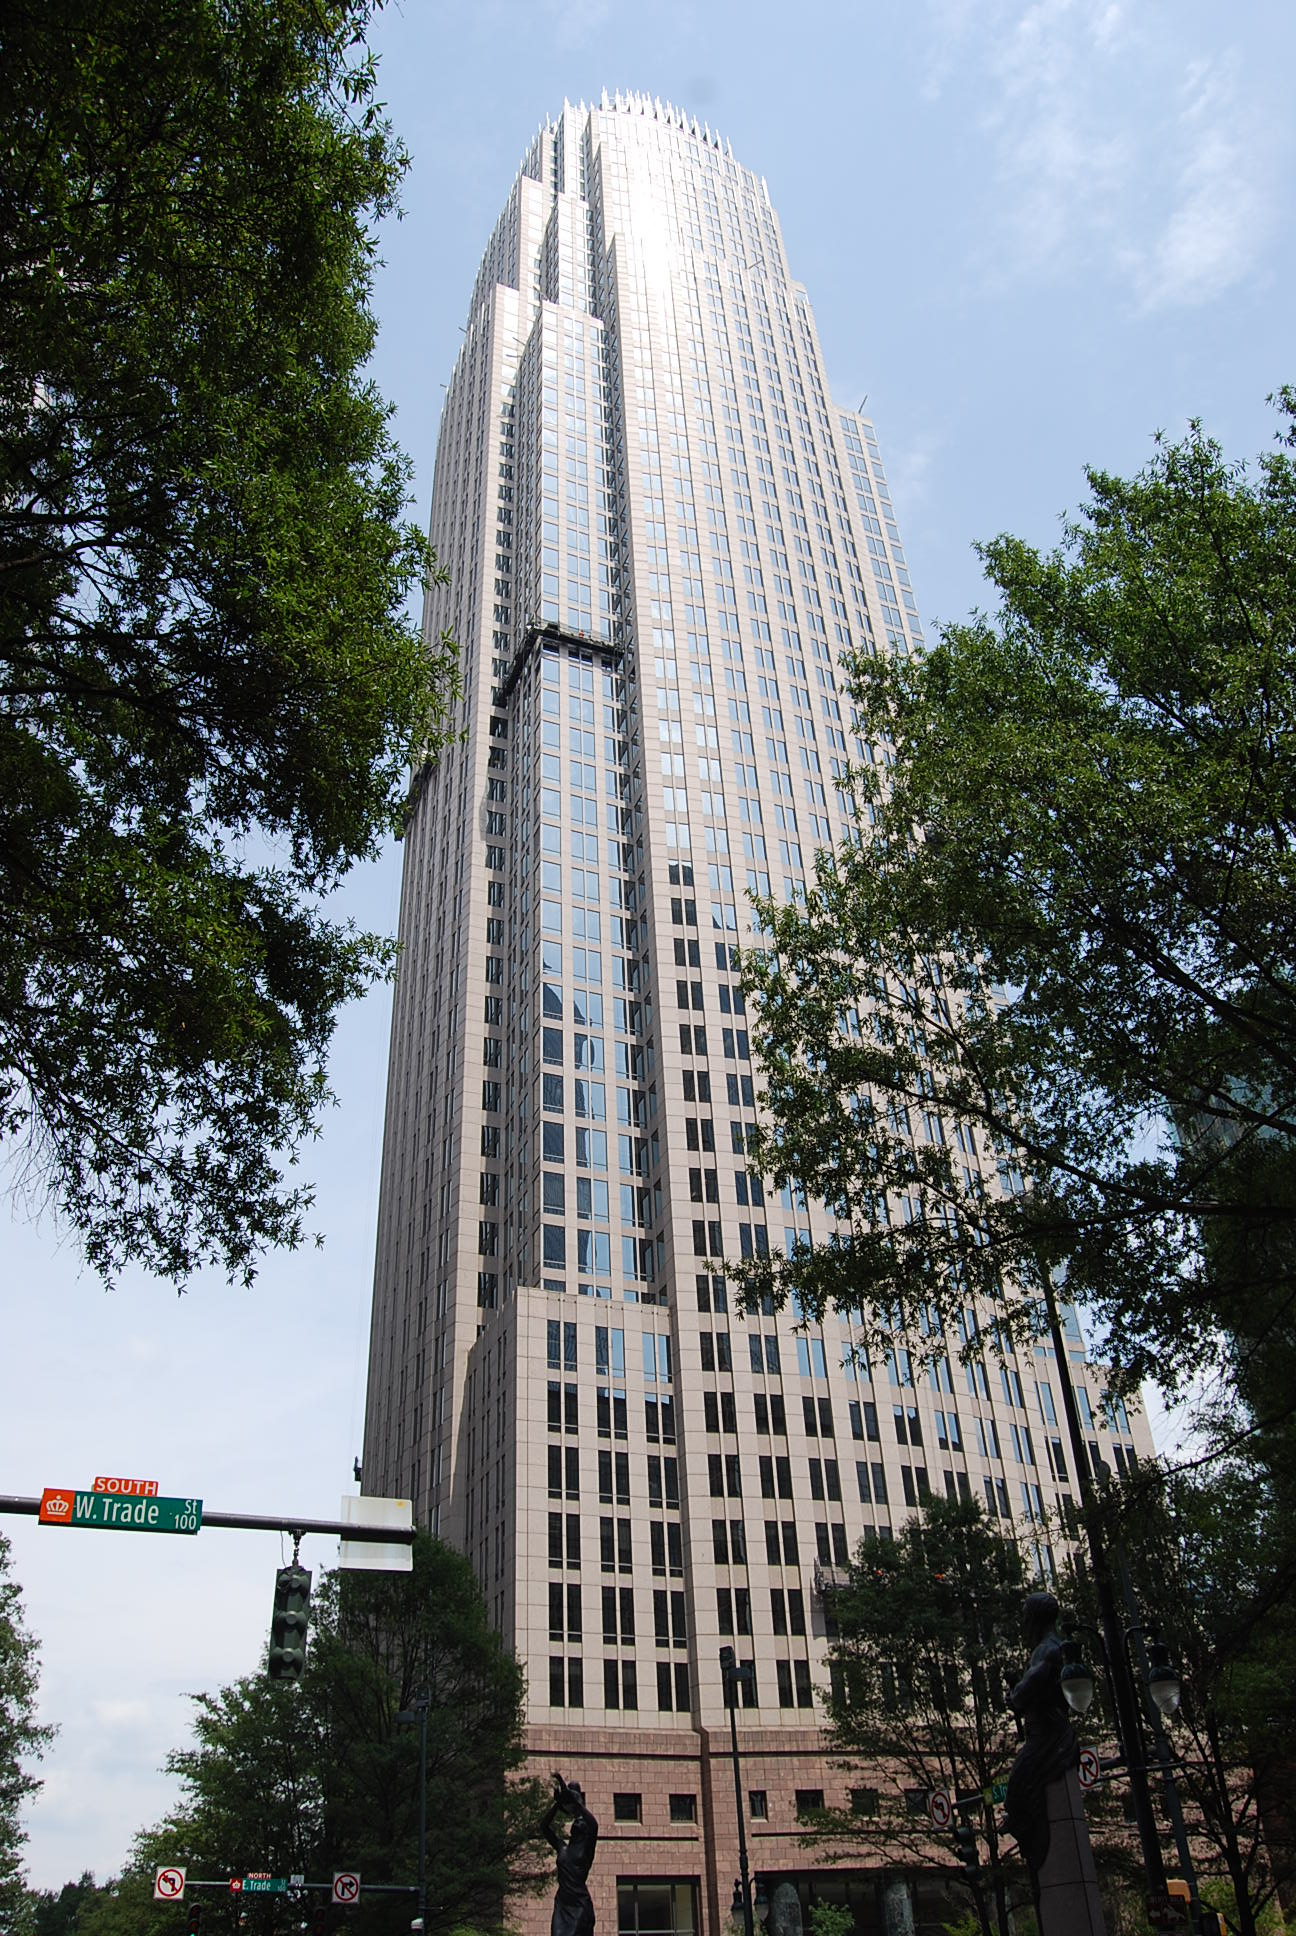 Charlotte Office Bank Of America Corporate Center 100 N Tryon Street Charlotte, NC 28202